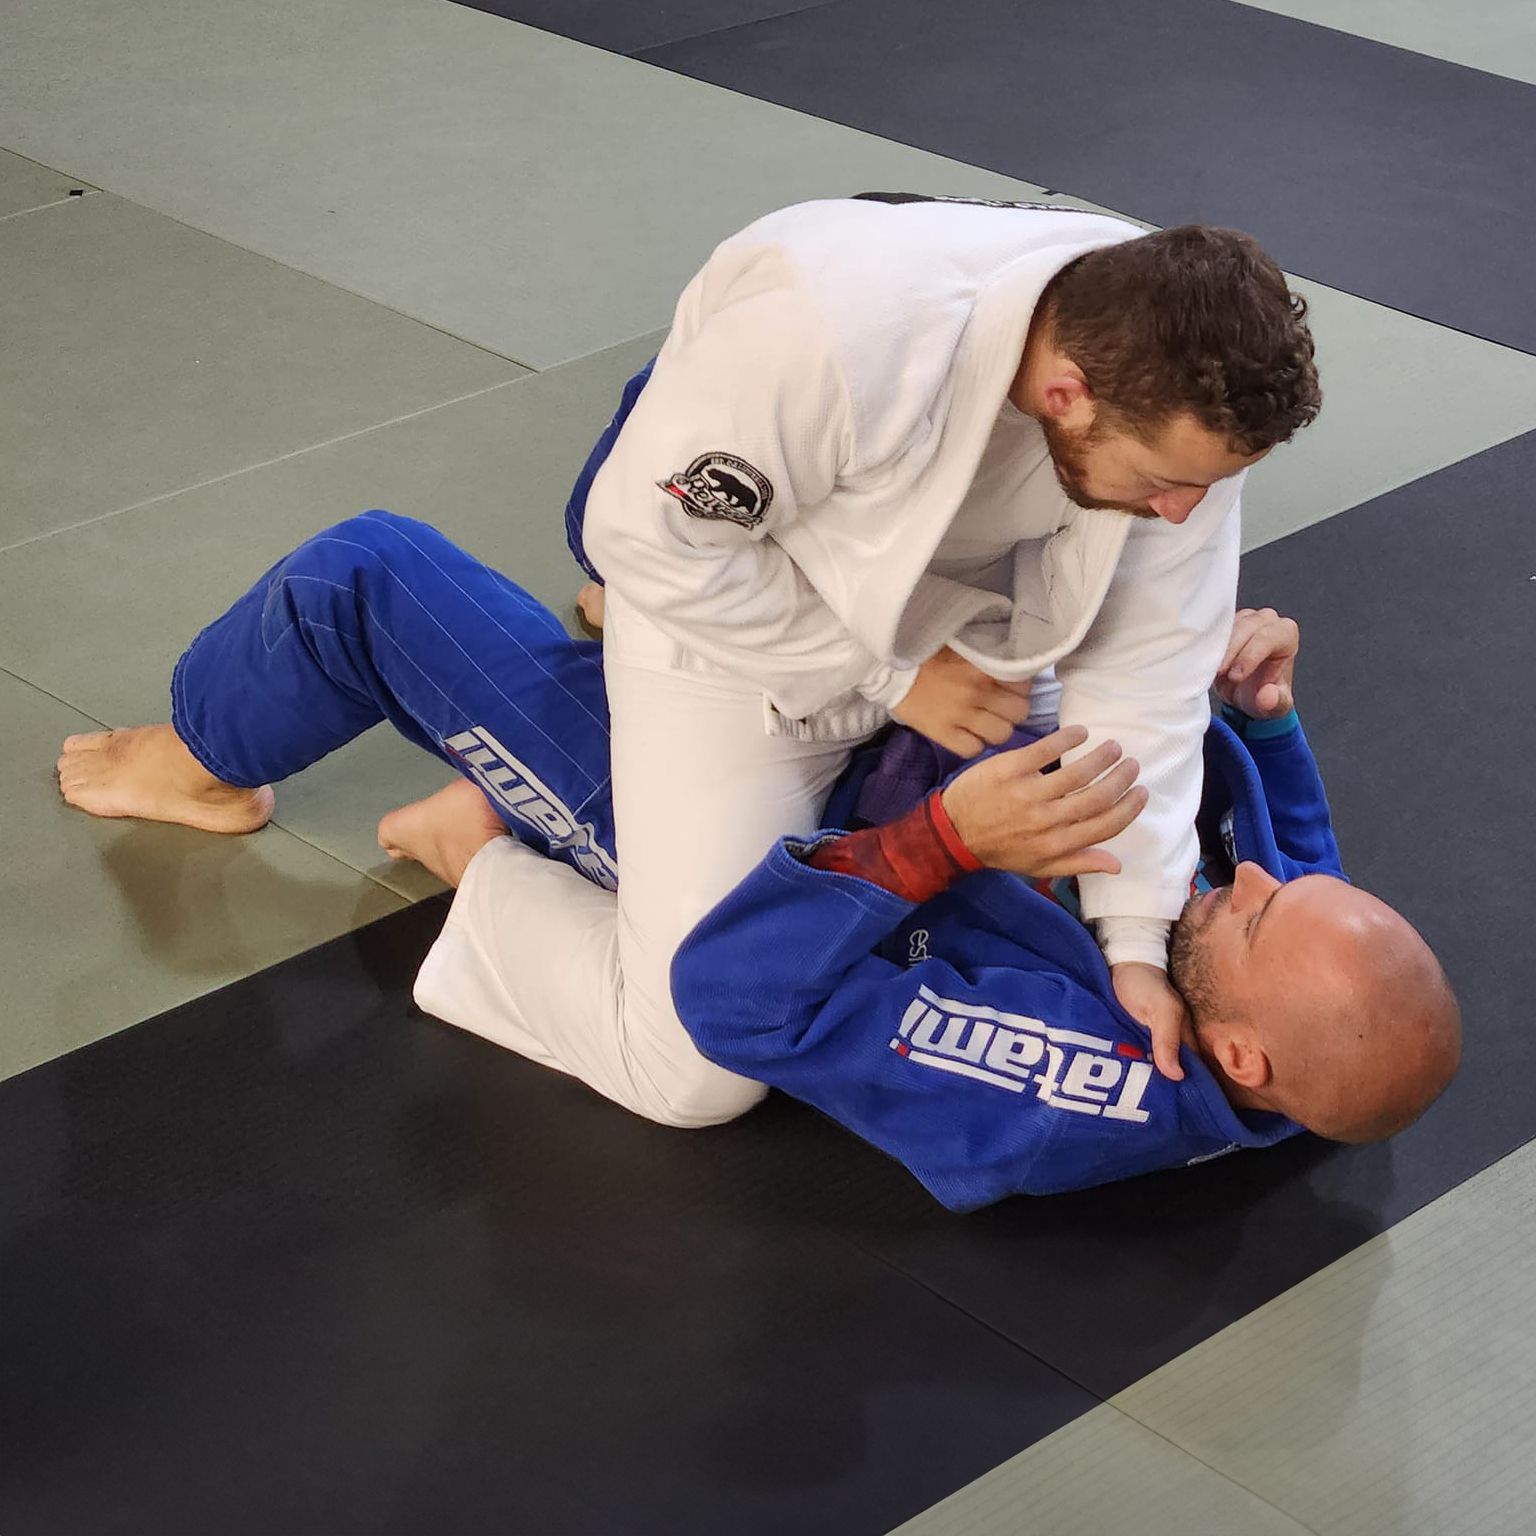 Two men are practicing jiu jitsu and one of them is wearing a blue uniform that says tatami